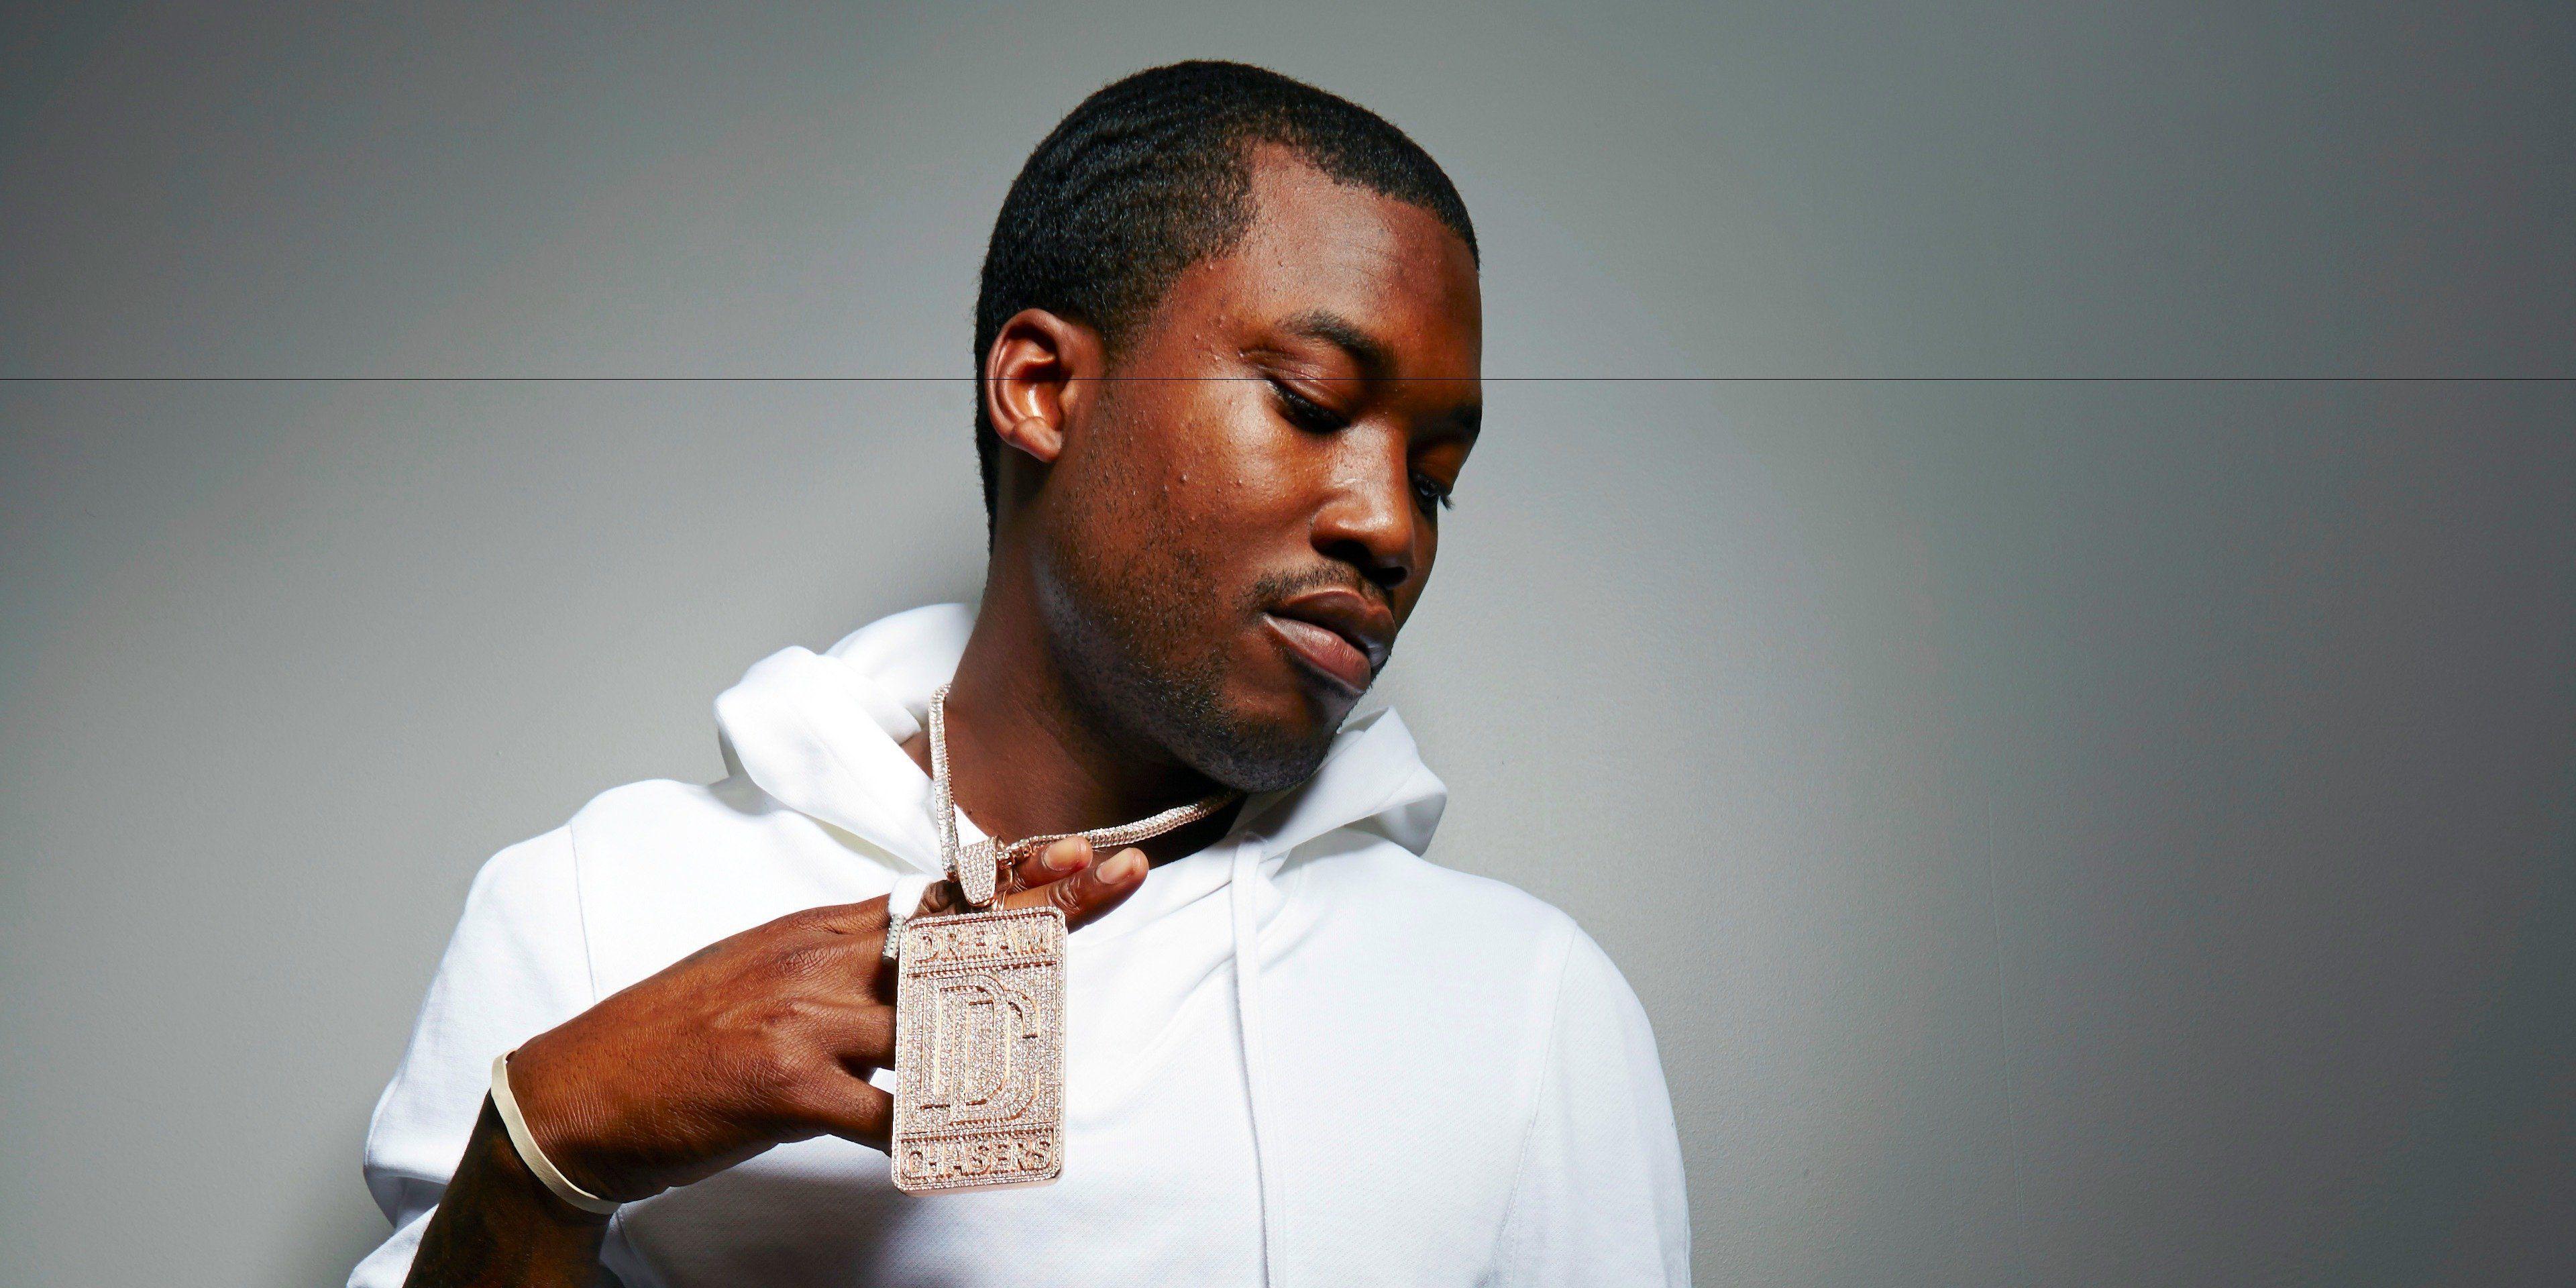 Meek Mill Wallpaper Image Photo Picture Background